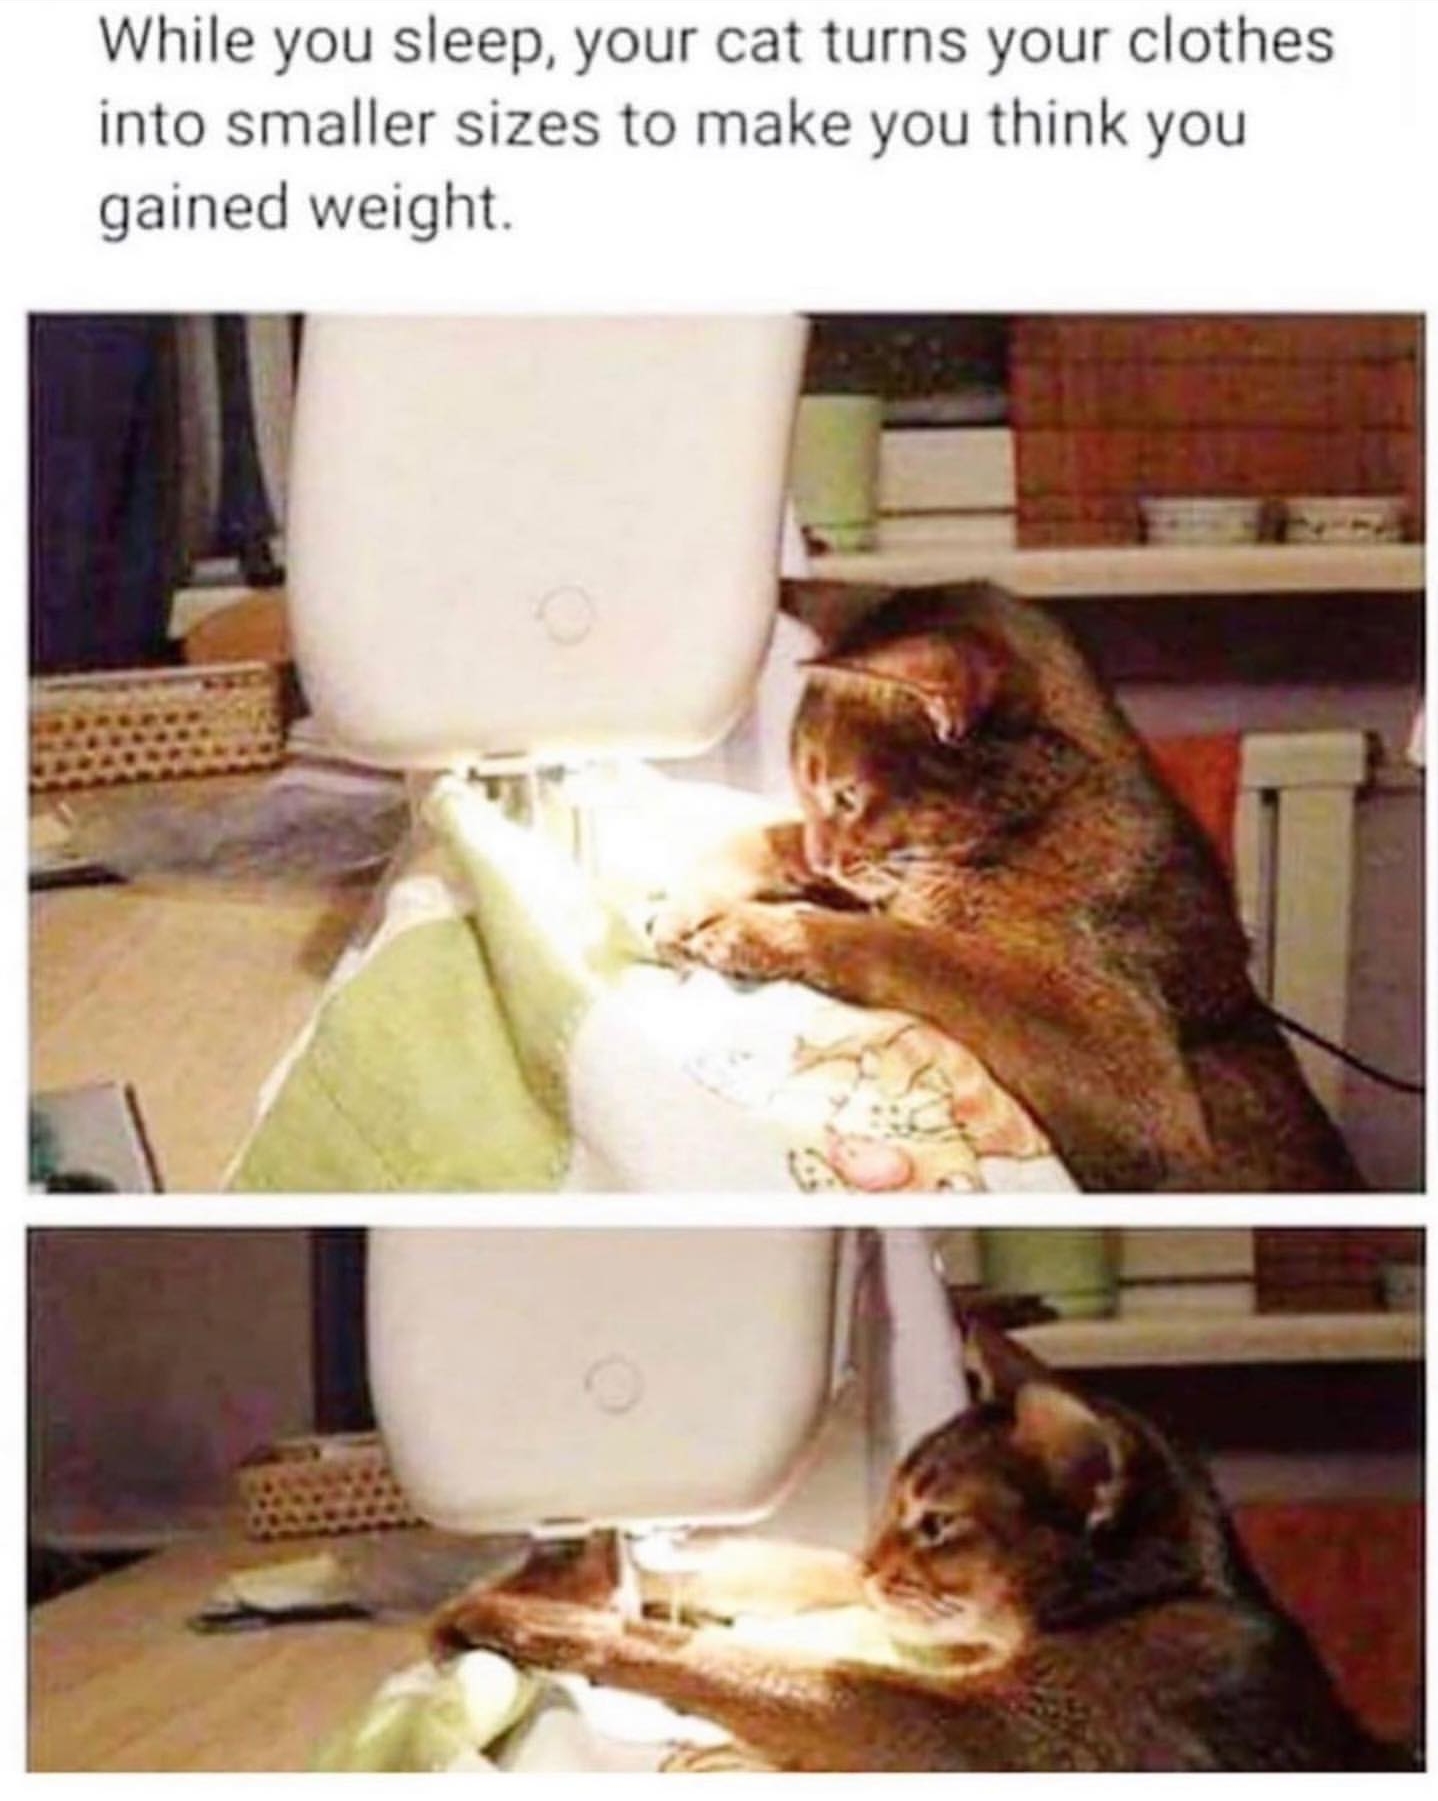 while you sleep your cat turns your clothes - While you sleep, your cat turns your clothes into smaller sizes to make you think you gained weight.